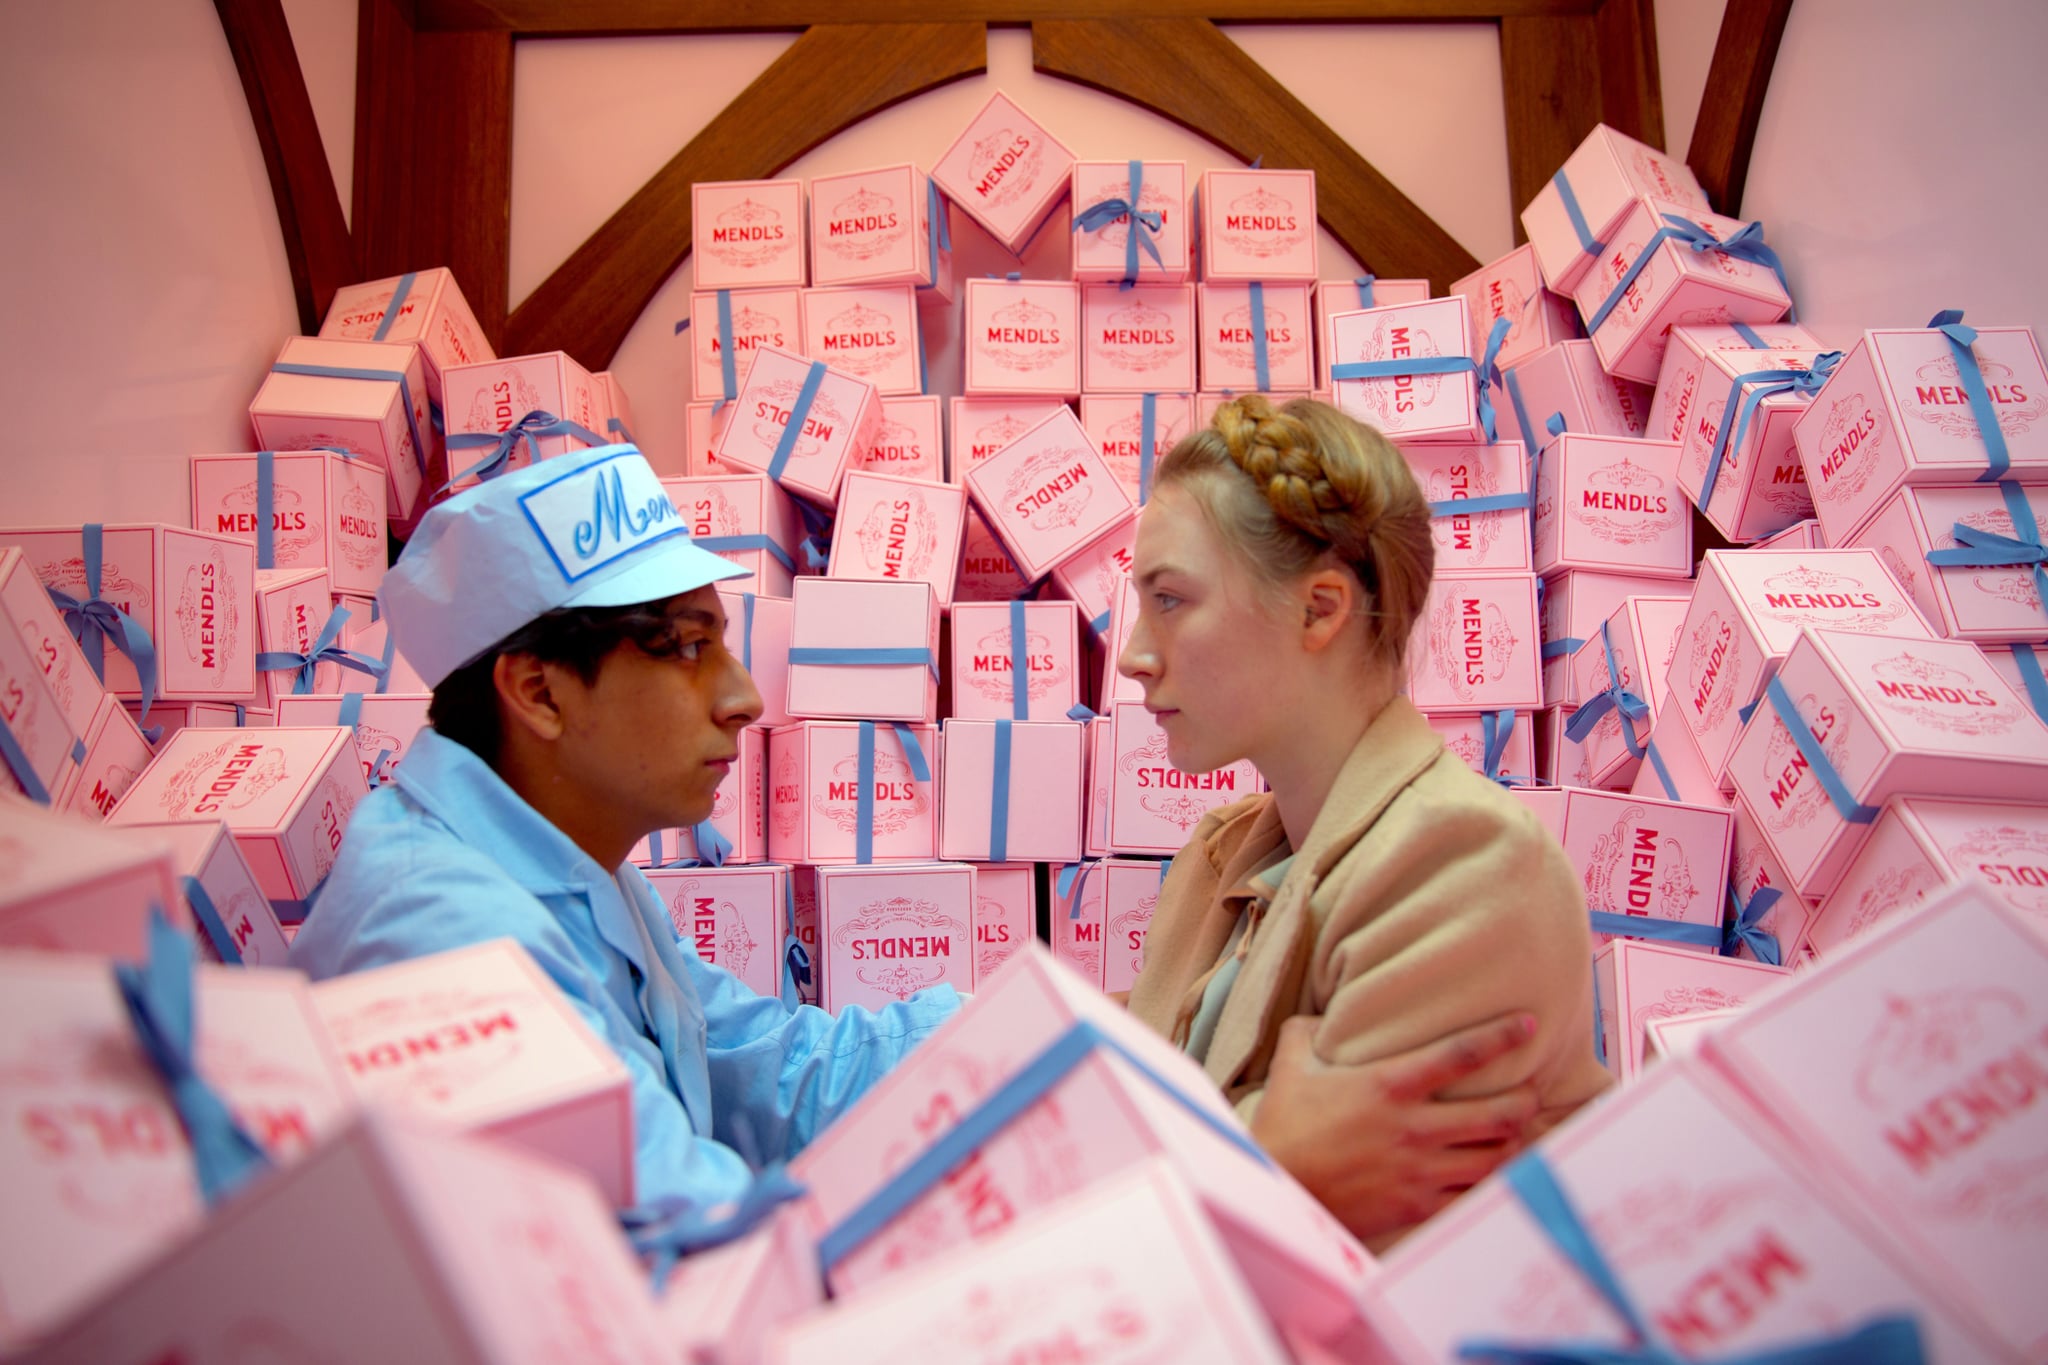 THE GRAND BUDAPEST HOTEL, from left: Tony Revolori, Saoirse Ronan, 2014. ph: Martin Scali/TM and Copyright Fox Searchlight Pictures. All rights reserved./courtesy Everett Collection